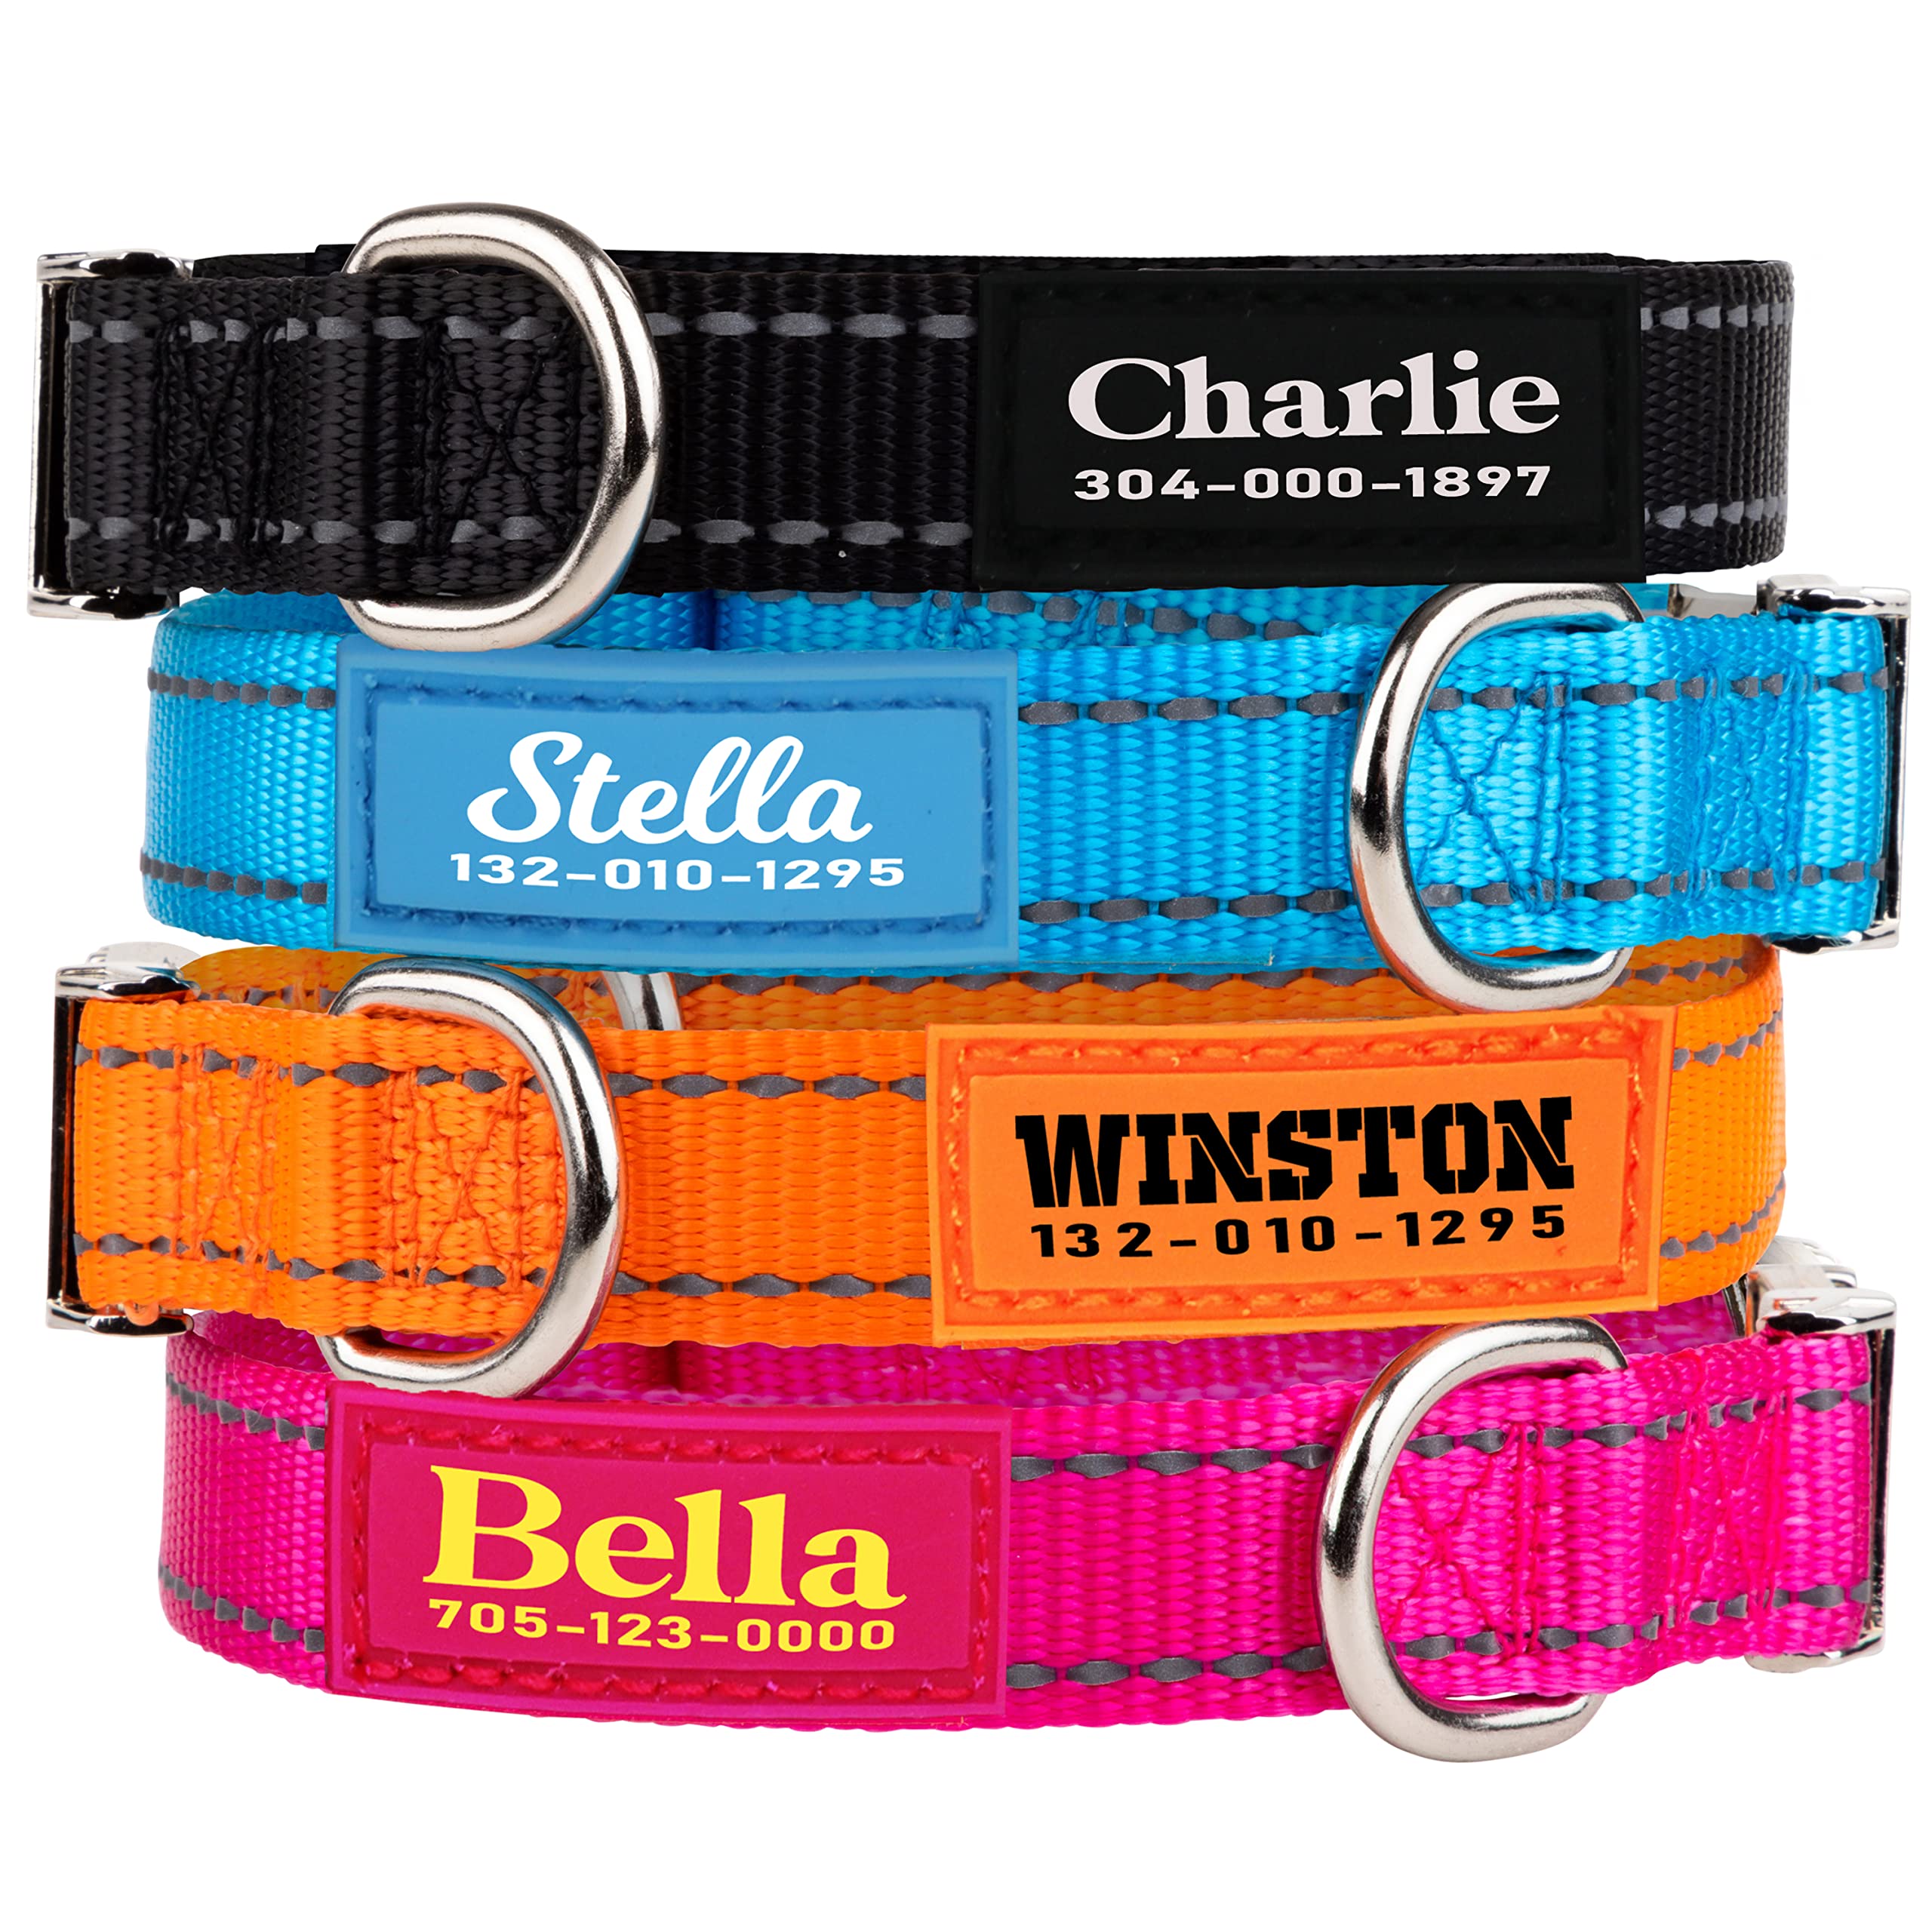 PAWBLEFY Personalized Dog Collars - Reflective Nylon Collar Customized with  Name and Phone Number - Adjustable Sizes Extra Small Medium Large Dogs, 4  Colors for Male Female boy Girl Puppies Small, Medium, Large